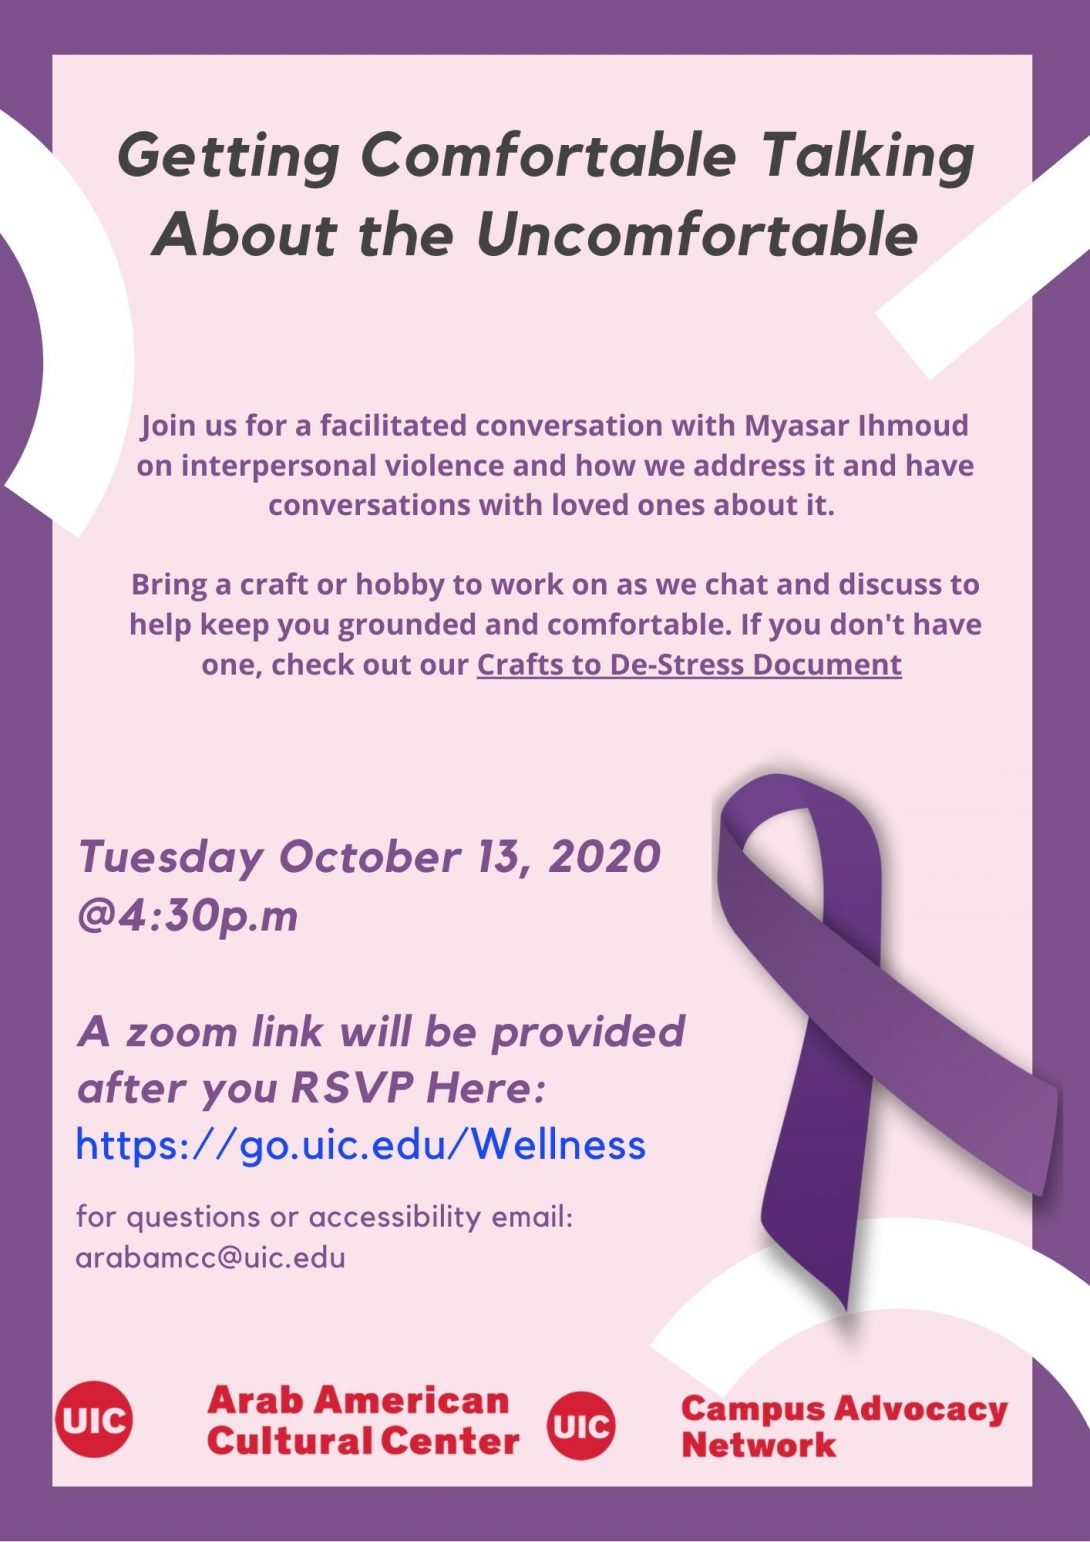 A purple ribbon commemorating Domestic Violence Awareness Month on a pink background with purple text describing the event.